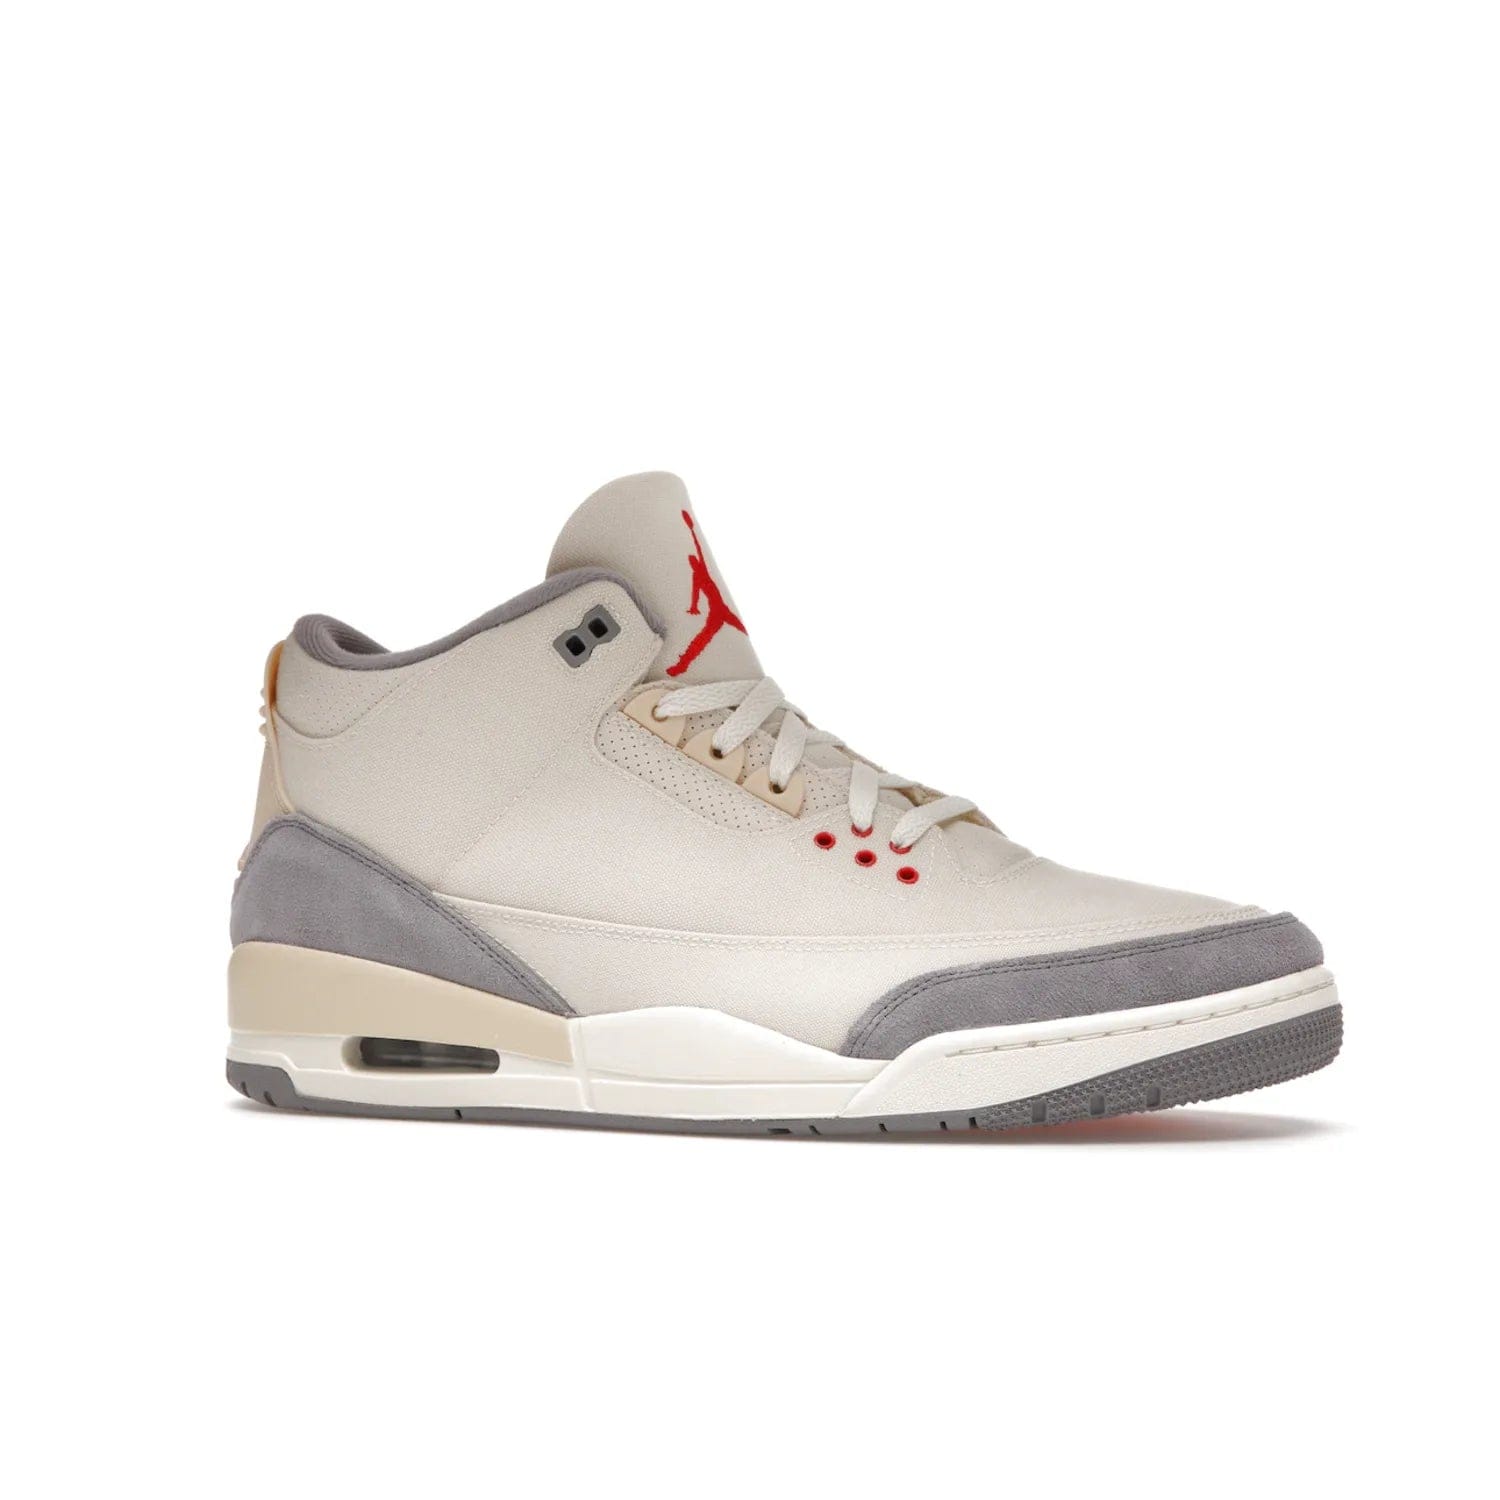 Jordan 3 Retro Muslin - Image 3 - Only at www.BallersClubKickz.com - Eye-catching Air Jordan 3 Retro Muslin in a neutral palette of grey, cream, and red. Featuring canvas upper, suede overlays and white/grey Air Max sole. Available in March 2022.